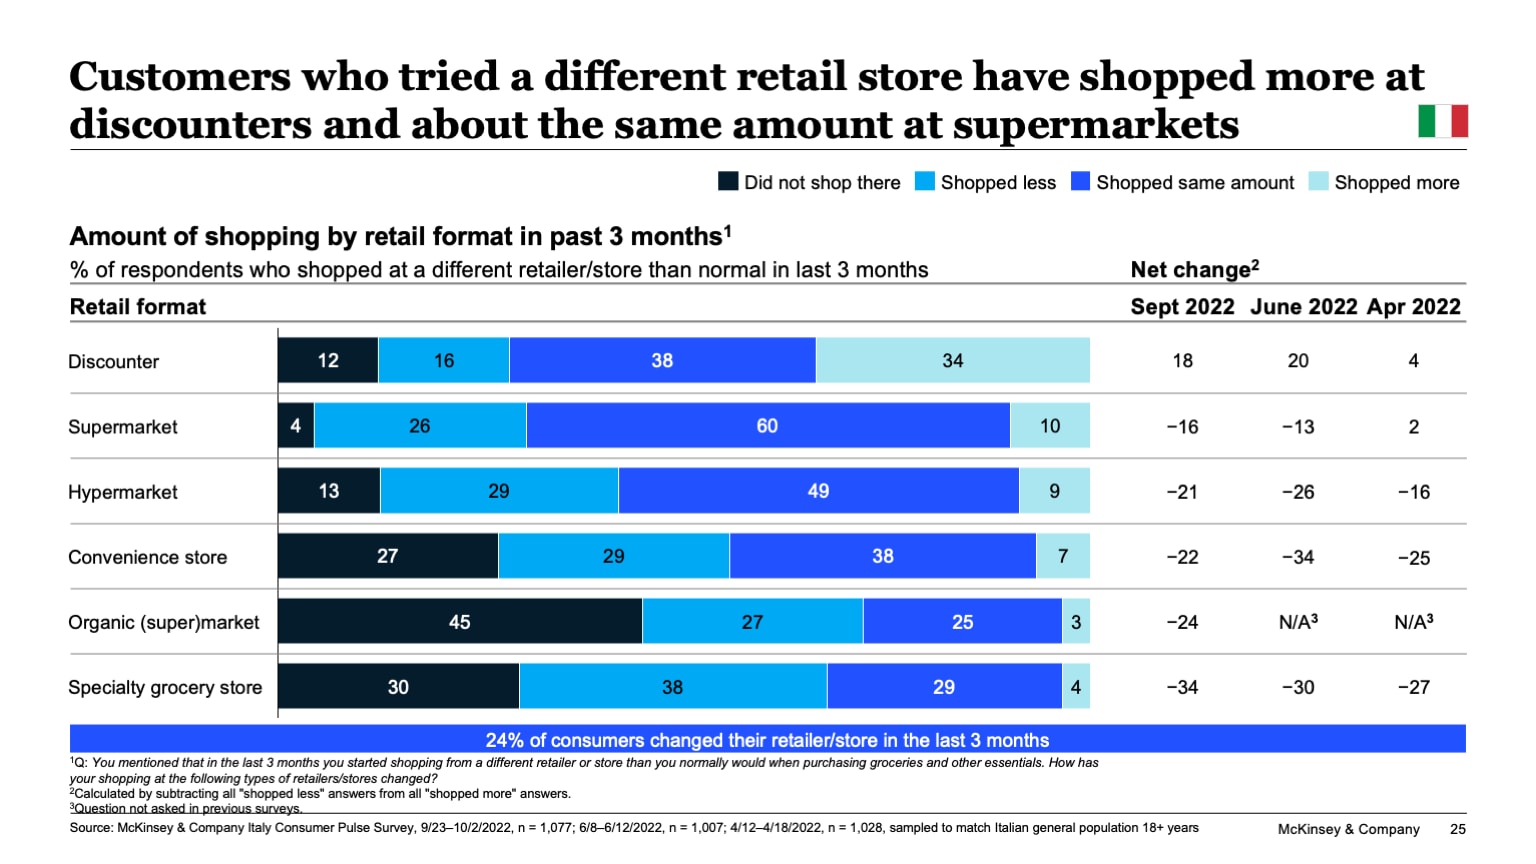 Customers who tried a different retail store have shopped more at discounters and about the same amount at supermarkets